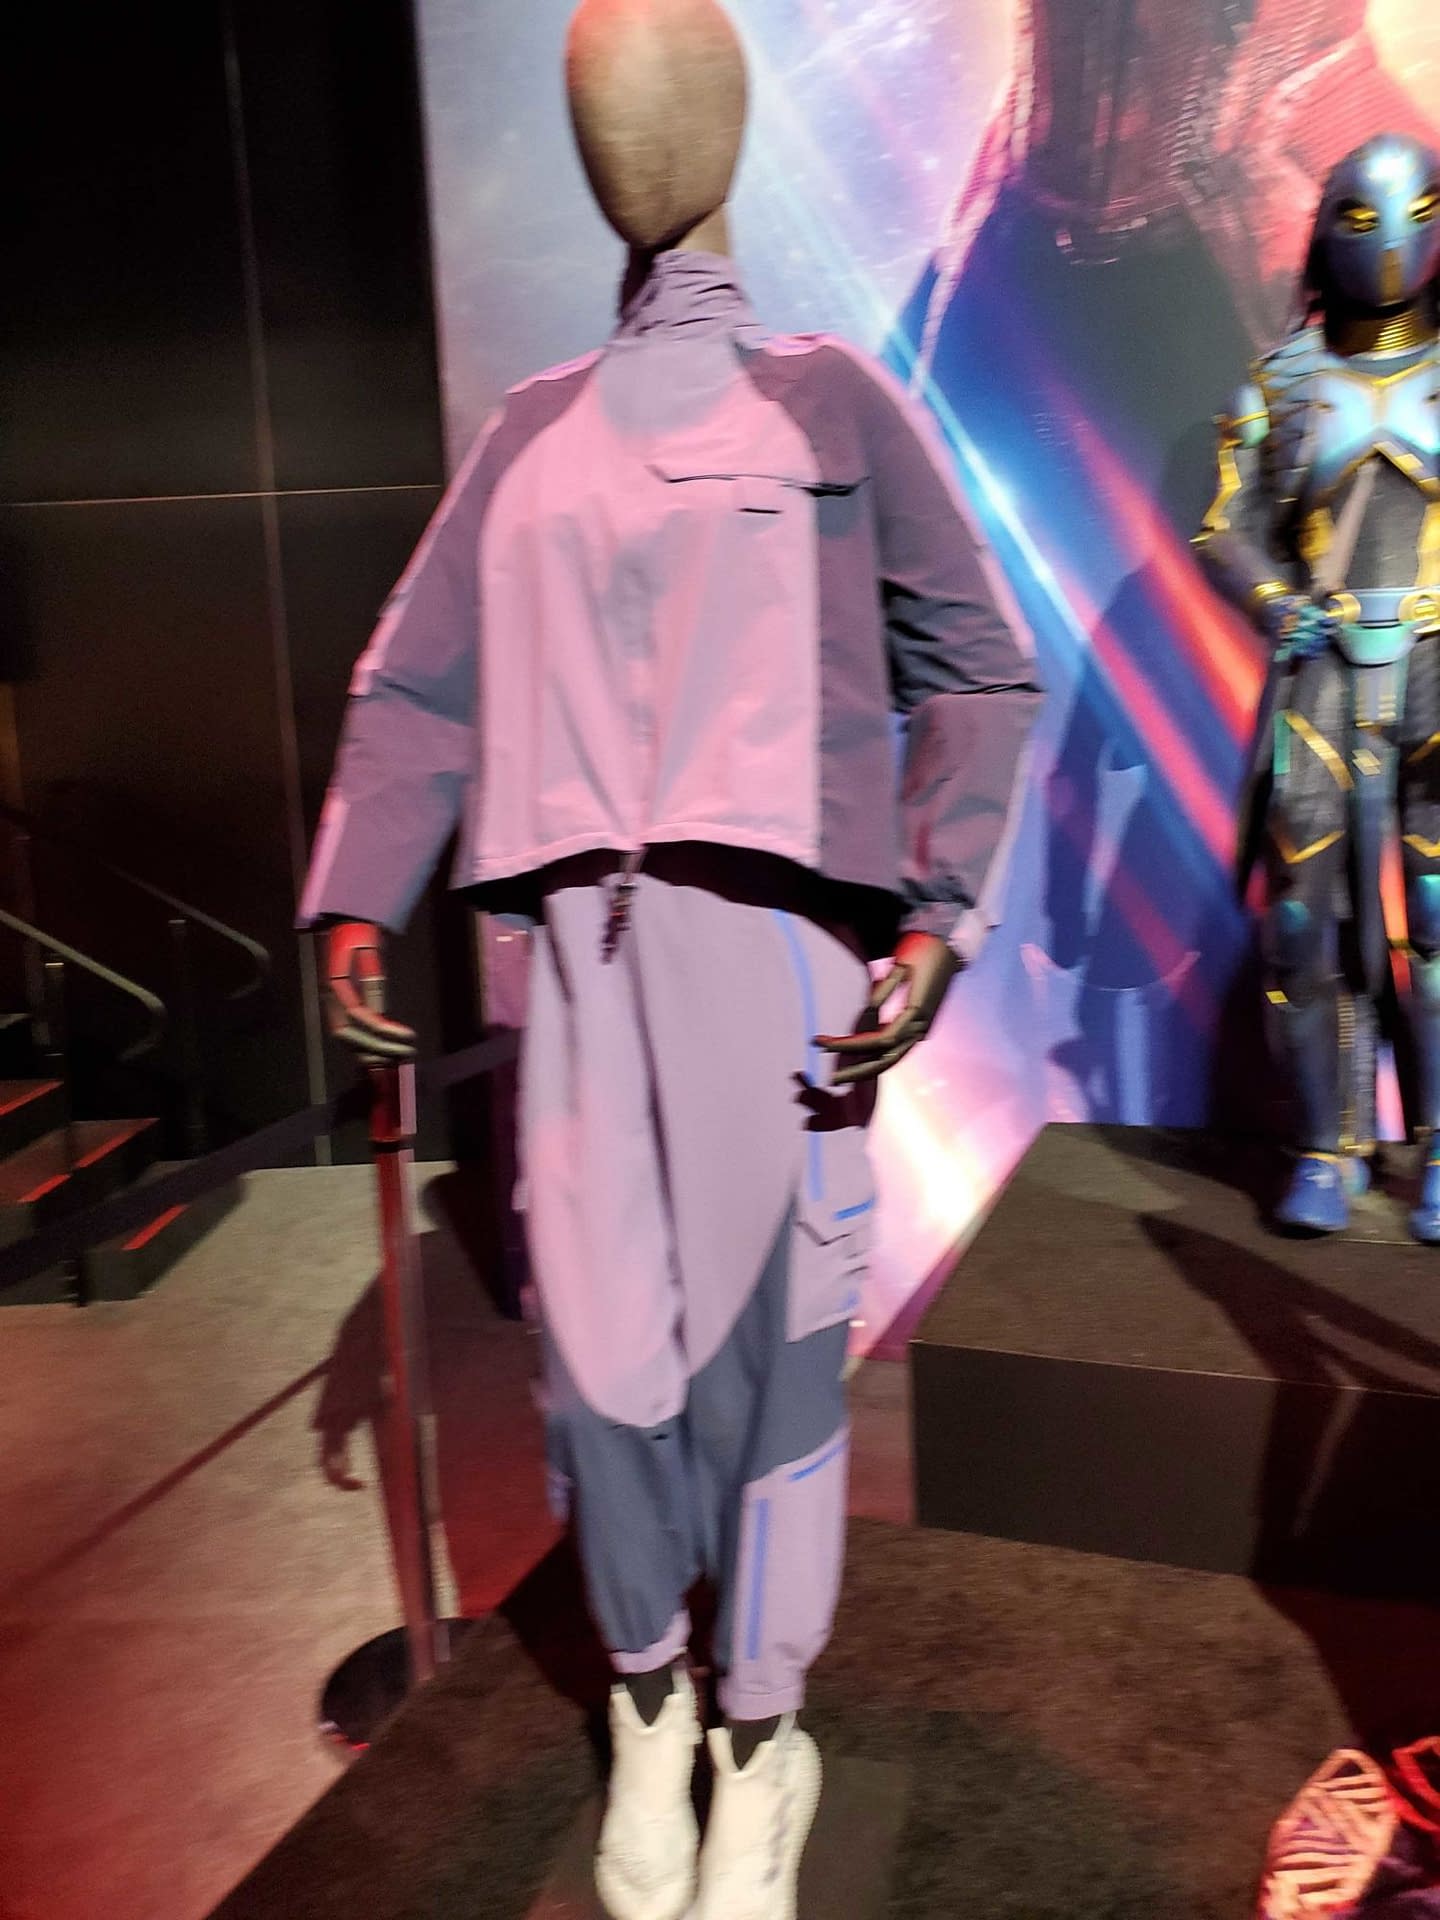 Black Panther: Wakanda Forever Costumes On Display At D23 Expo